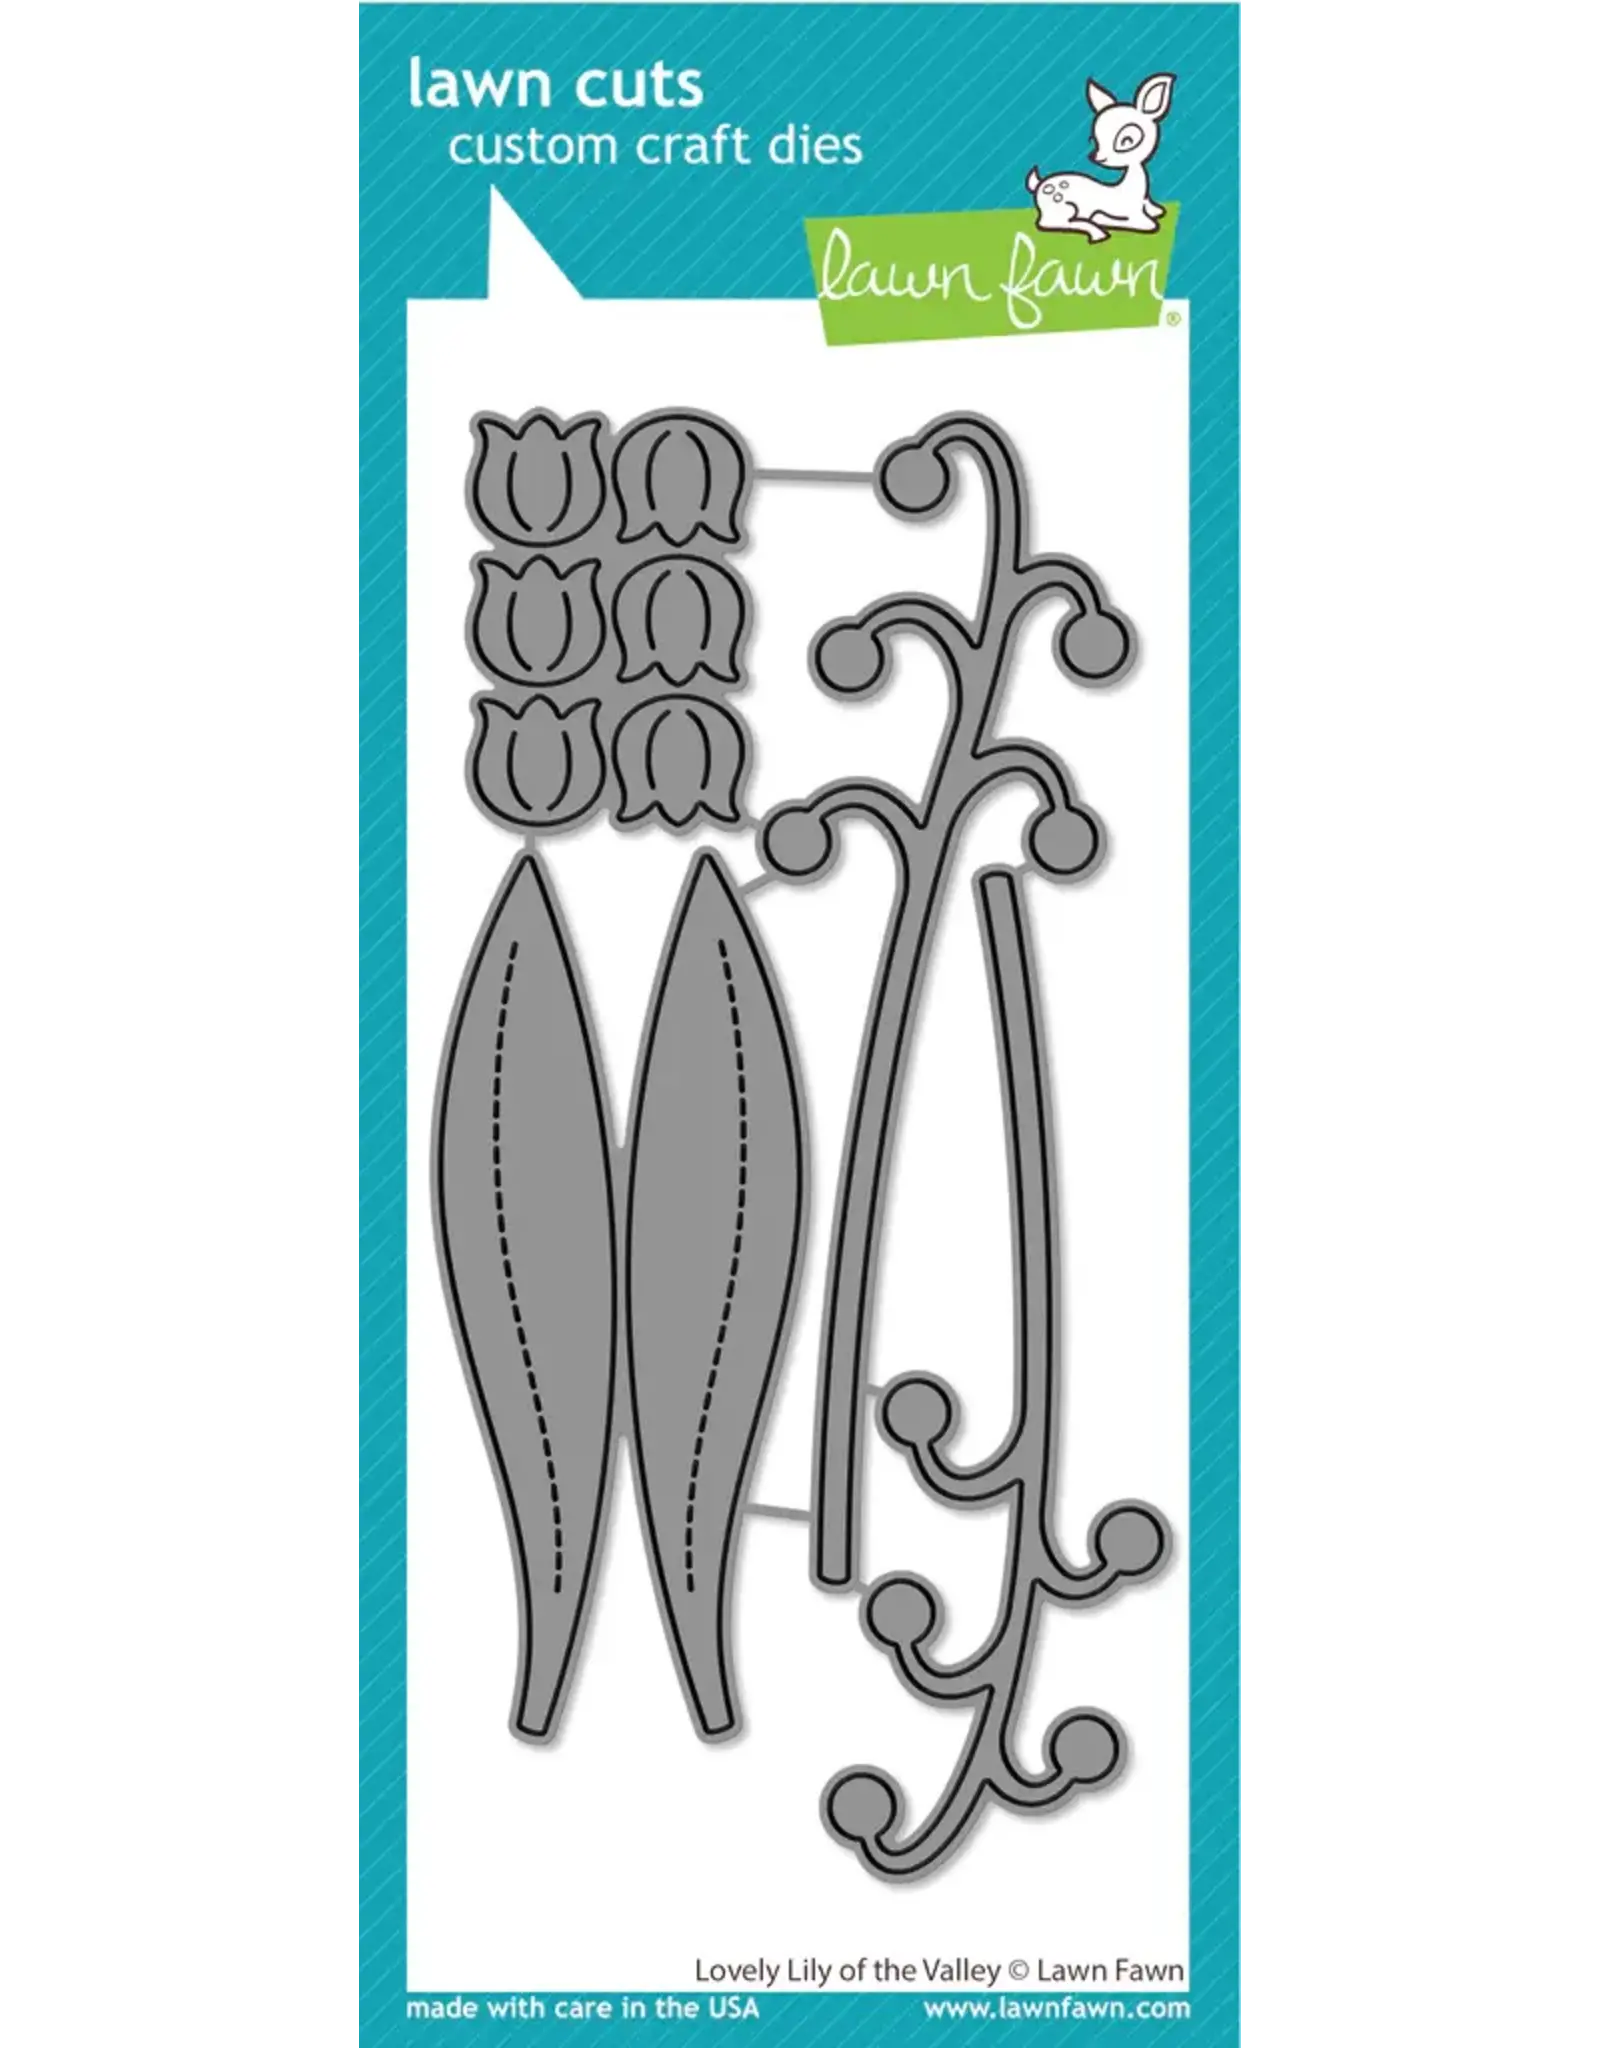 LAWN FAWN LAWN FAWN LOVELY LILY OF THE VALLEY DIE SET